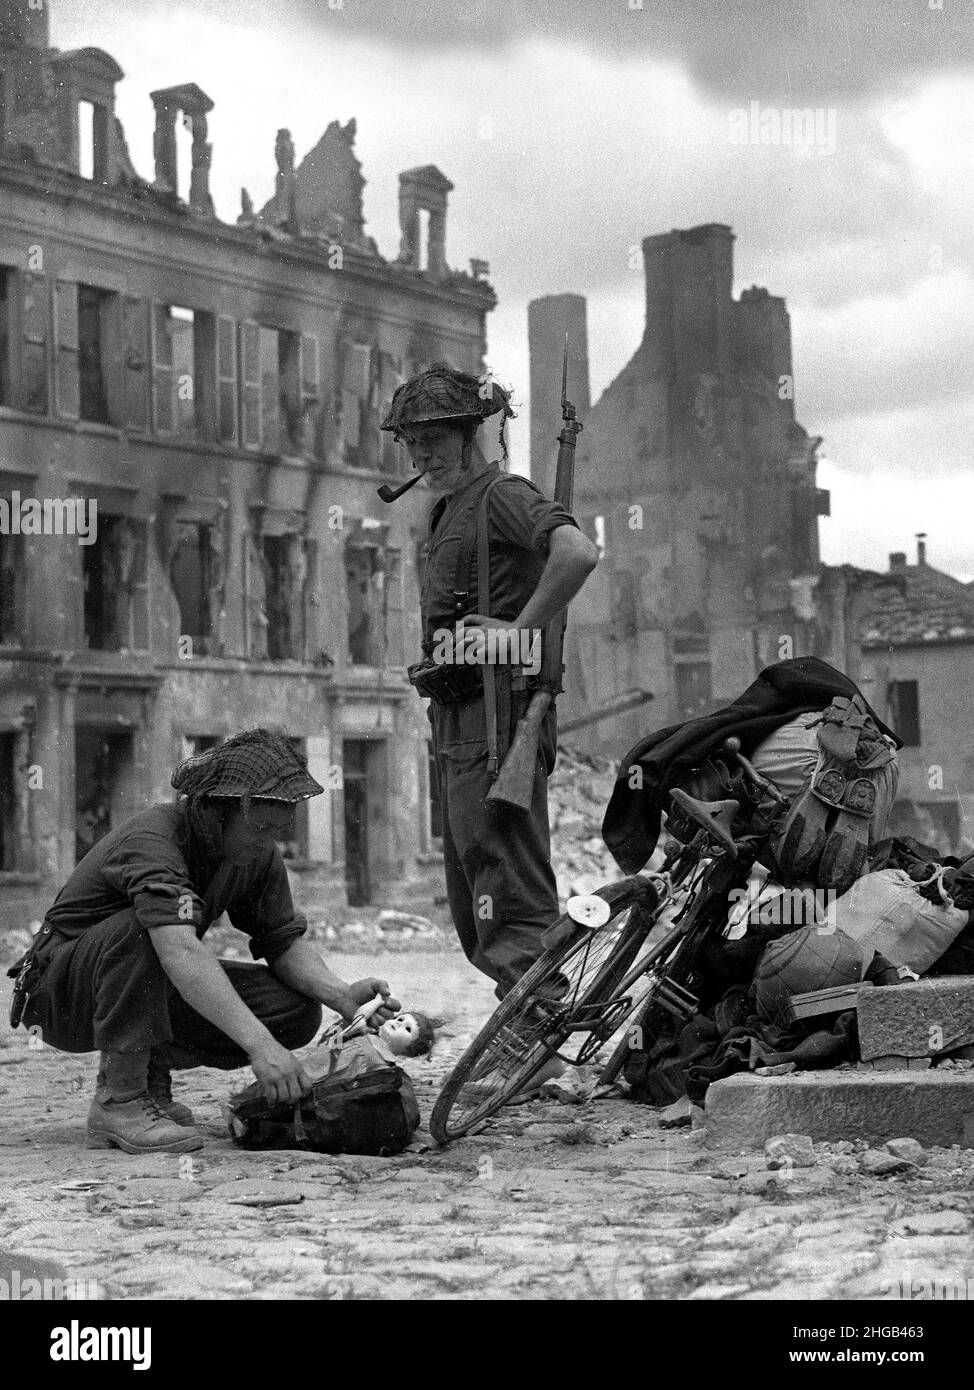 Northern France World War Two 1944 british soldiers looking at a childs doll found with a bicycle of civilians trying to escape. LARGER FILES AVAILABLE ON REQUEST Stock Photo